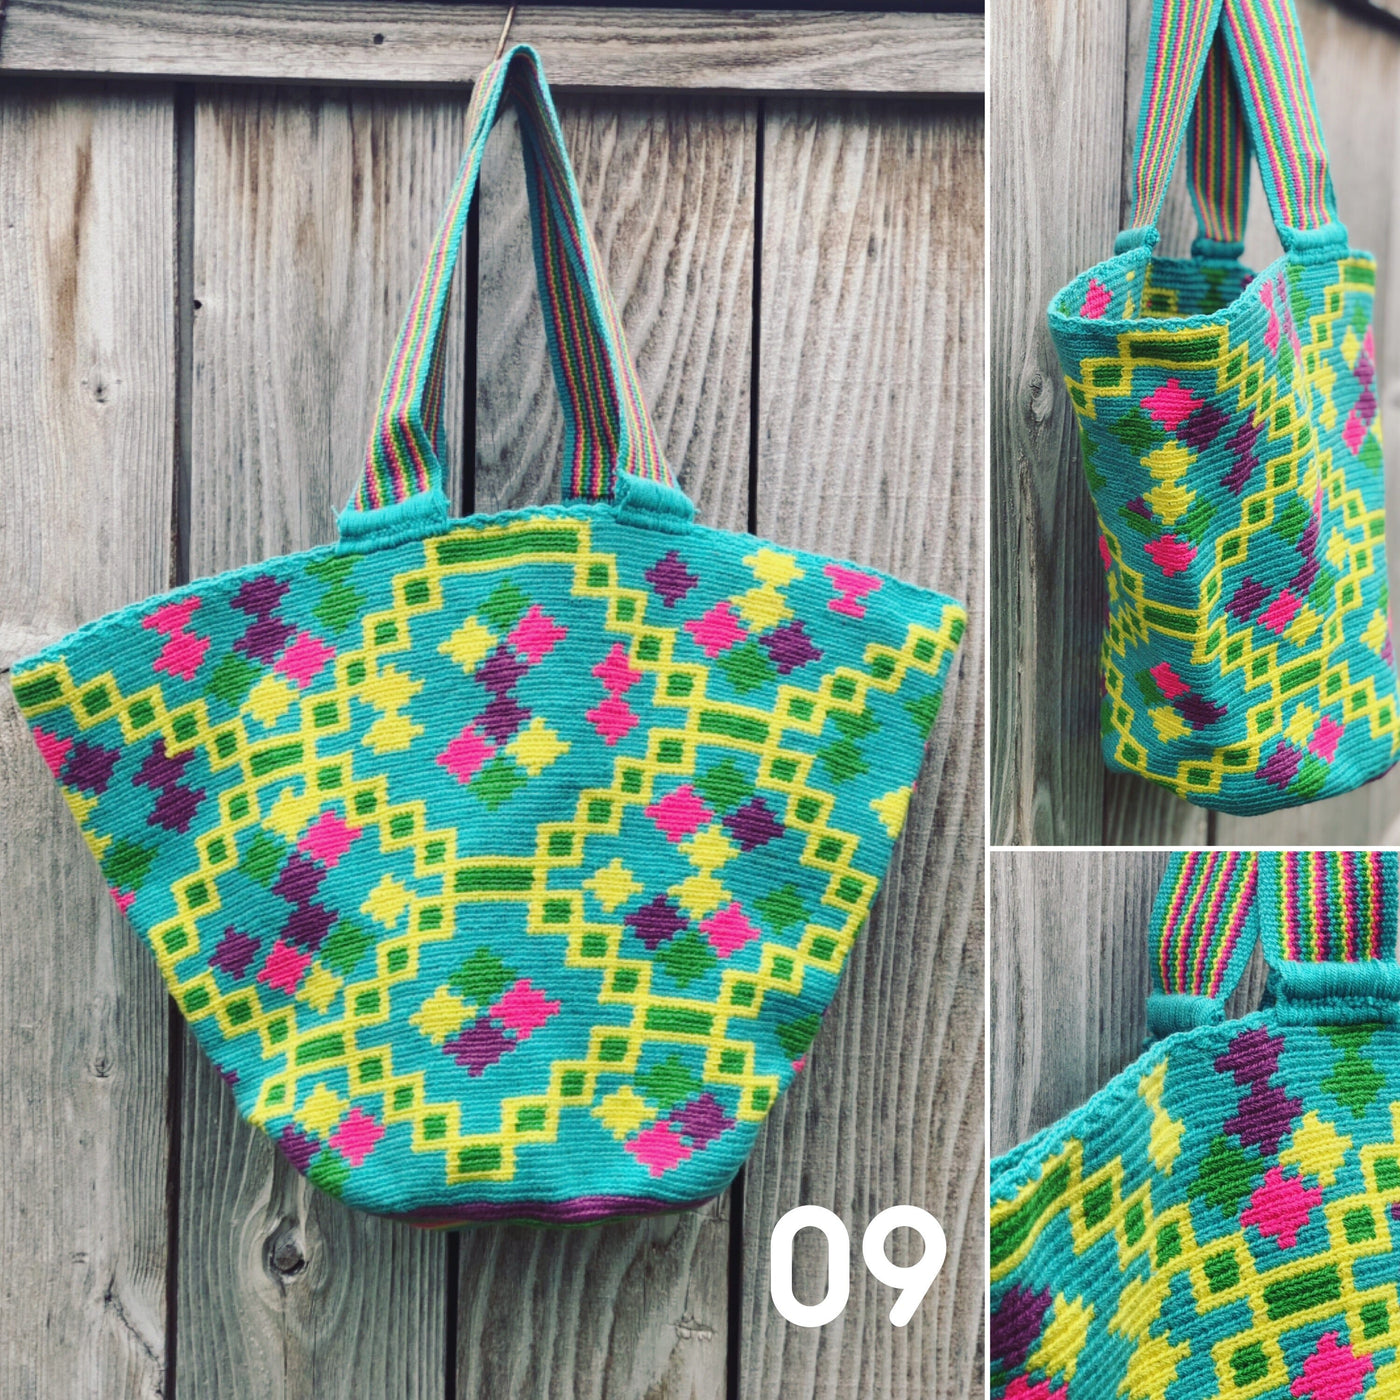 Turquoise- Yellow Summer Tote Bag | Beach Tote Bag for summer | Crochet Tote Bag | Colorful 4u